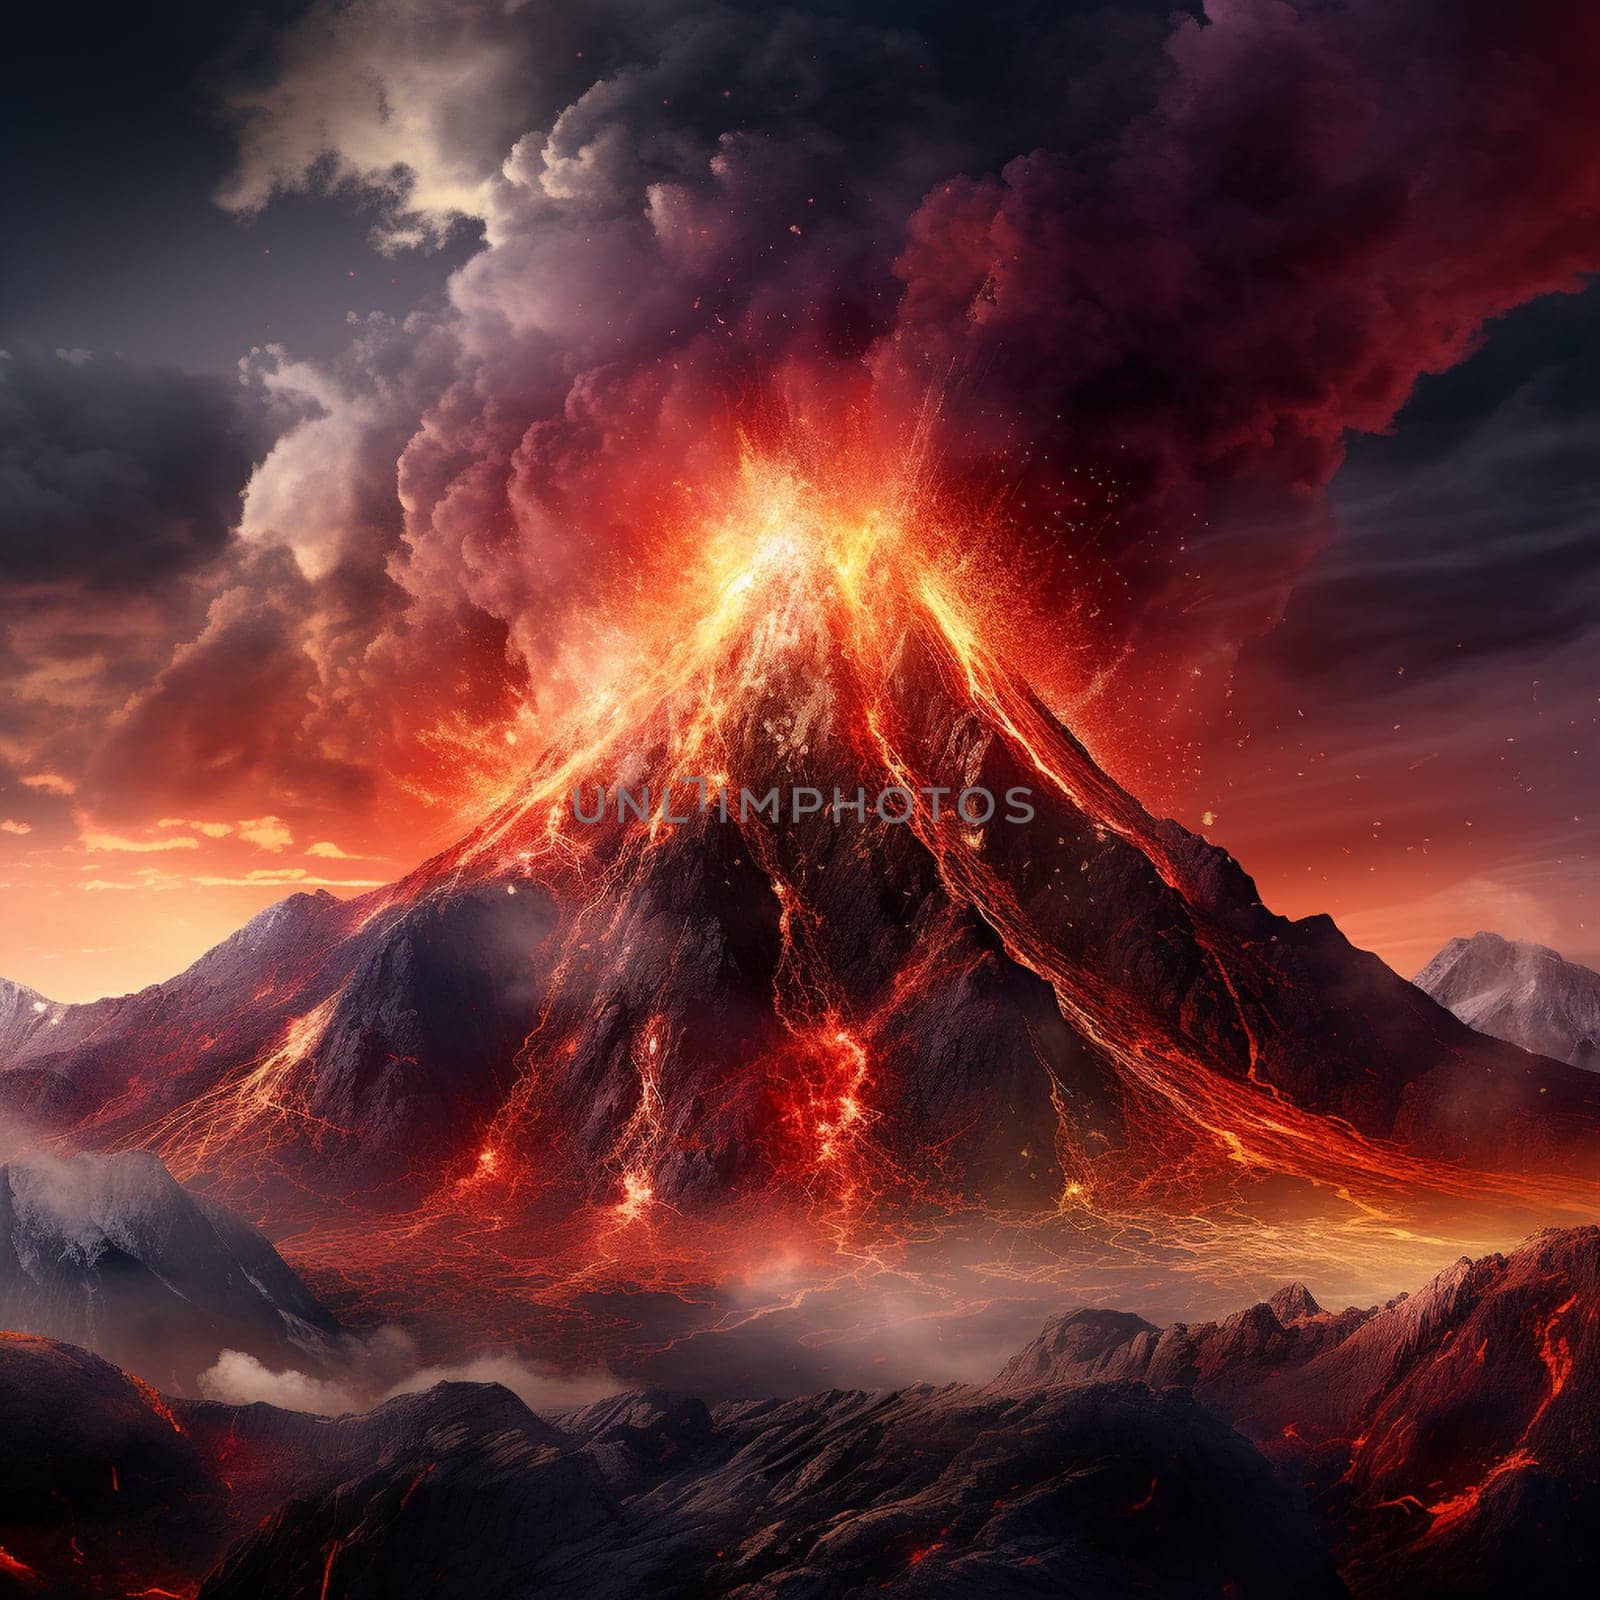 Witness the raw power and breathtaking beauty of a volcanic eruption with this intense and vivid image titled 'Firestorm Burst.' The scene depicts the awe-inspiring moment when molten lava violently explodes from the volcano's crater, creating a scorching cascade of fiery debris and billows of smoke that ascend into the darkened sky. The surrounding landscape is cloaked in darkness, illuminated solely by the vibrant glow of the red-hot lava and occasional flashes of distant lightning. This realistic digital painting style emphasizes the striking contrast between the fiery eruption and the ominous night sky, resulting in a captivating and evocative composition that evokes a wide range of reactions and emotions.